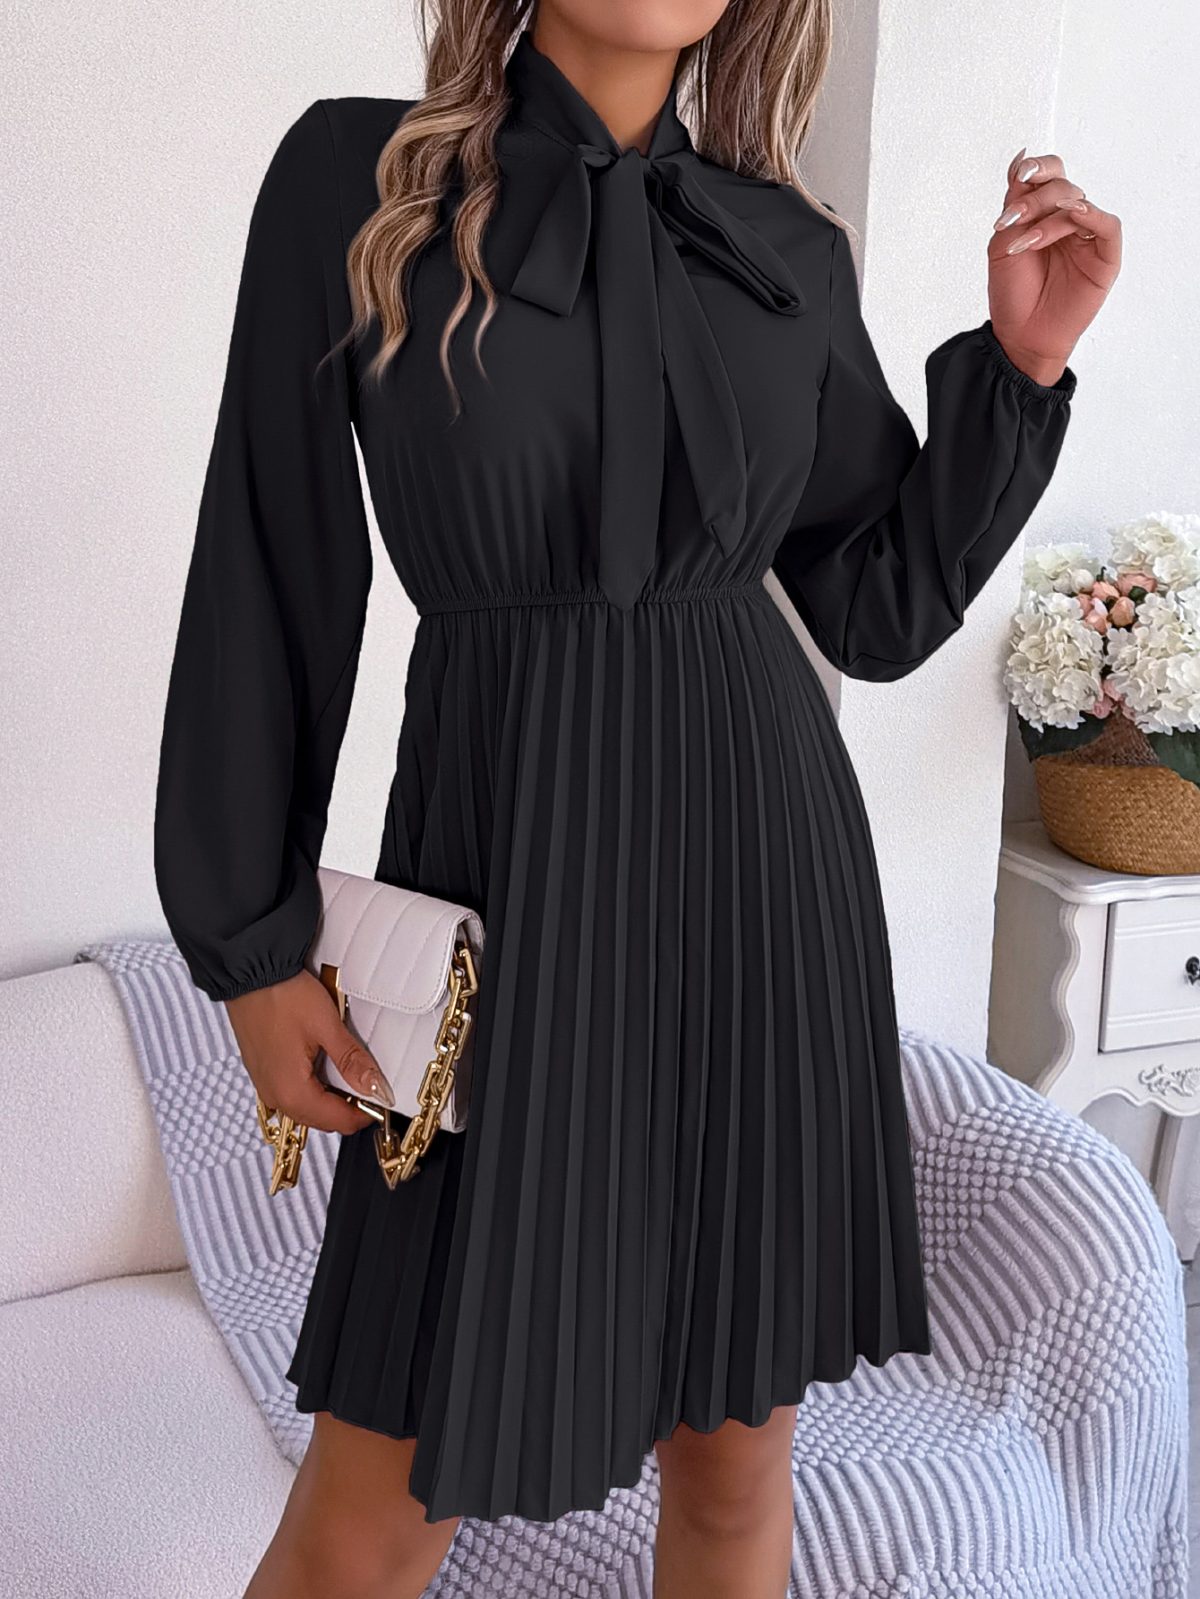 Elegant Tied Waist Controlled Long Sleeves Pleated Dress in Dresses